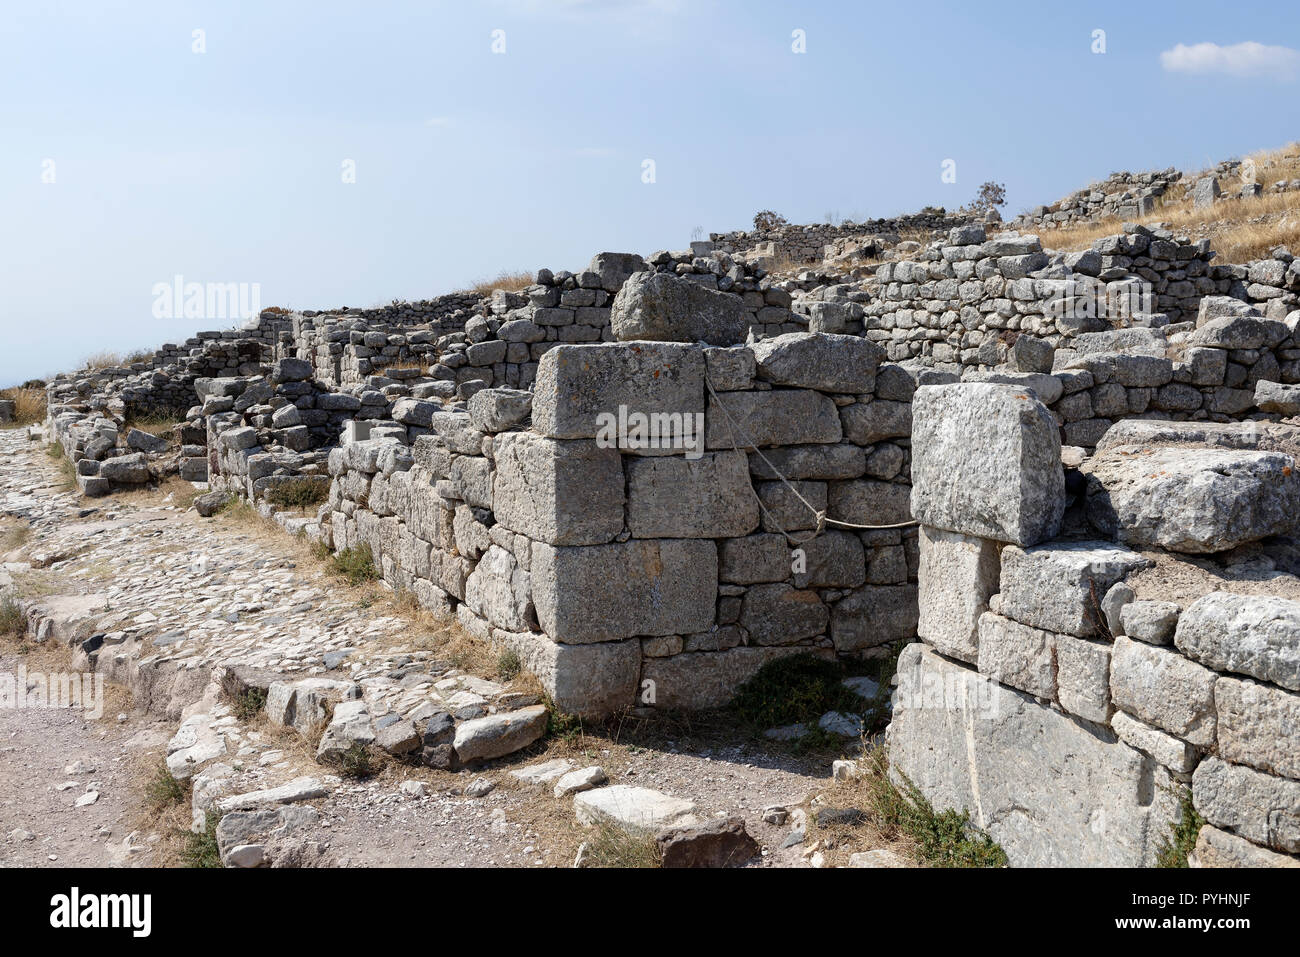 Ruins of a stone building along the main street of the ancient city of Thera, Santorini, Greece. Stock Photo